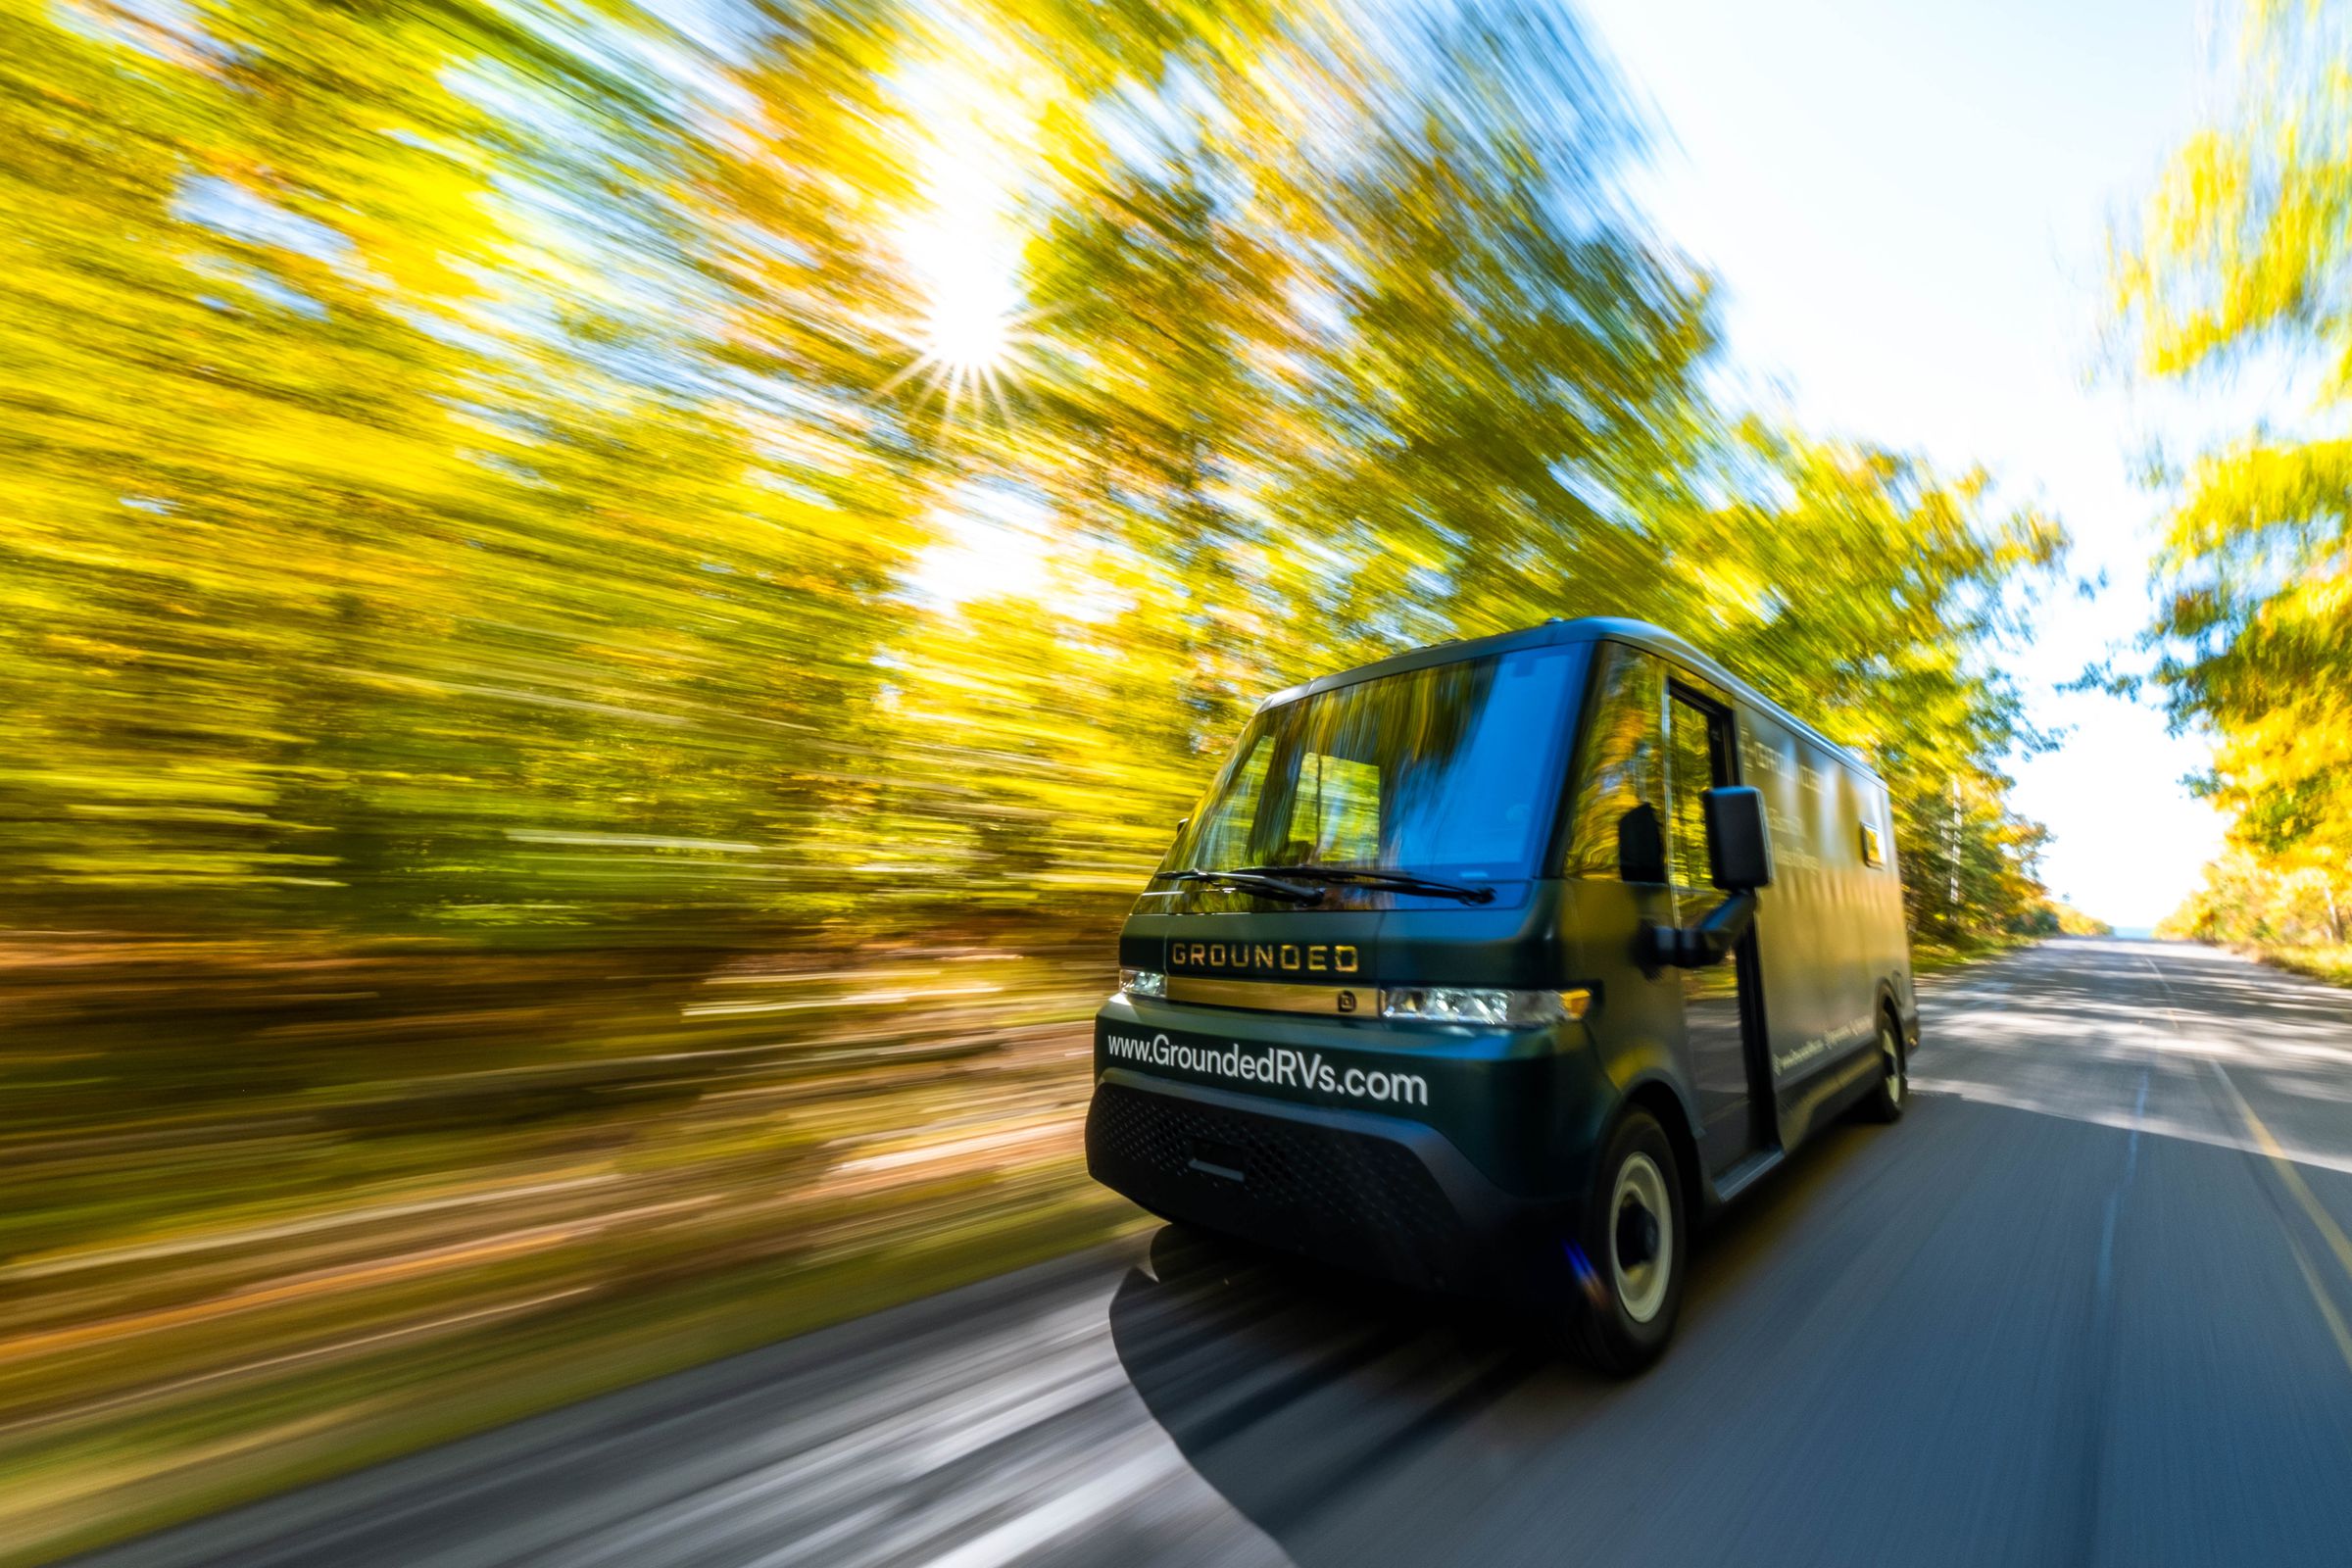 A boxy Grounded G2 camper van drives down a blurry tree-lined road.